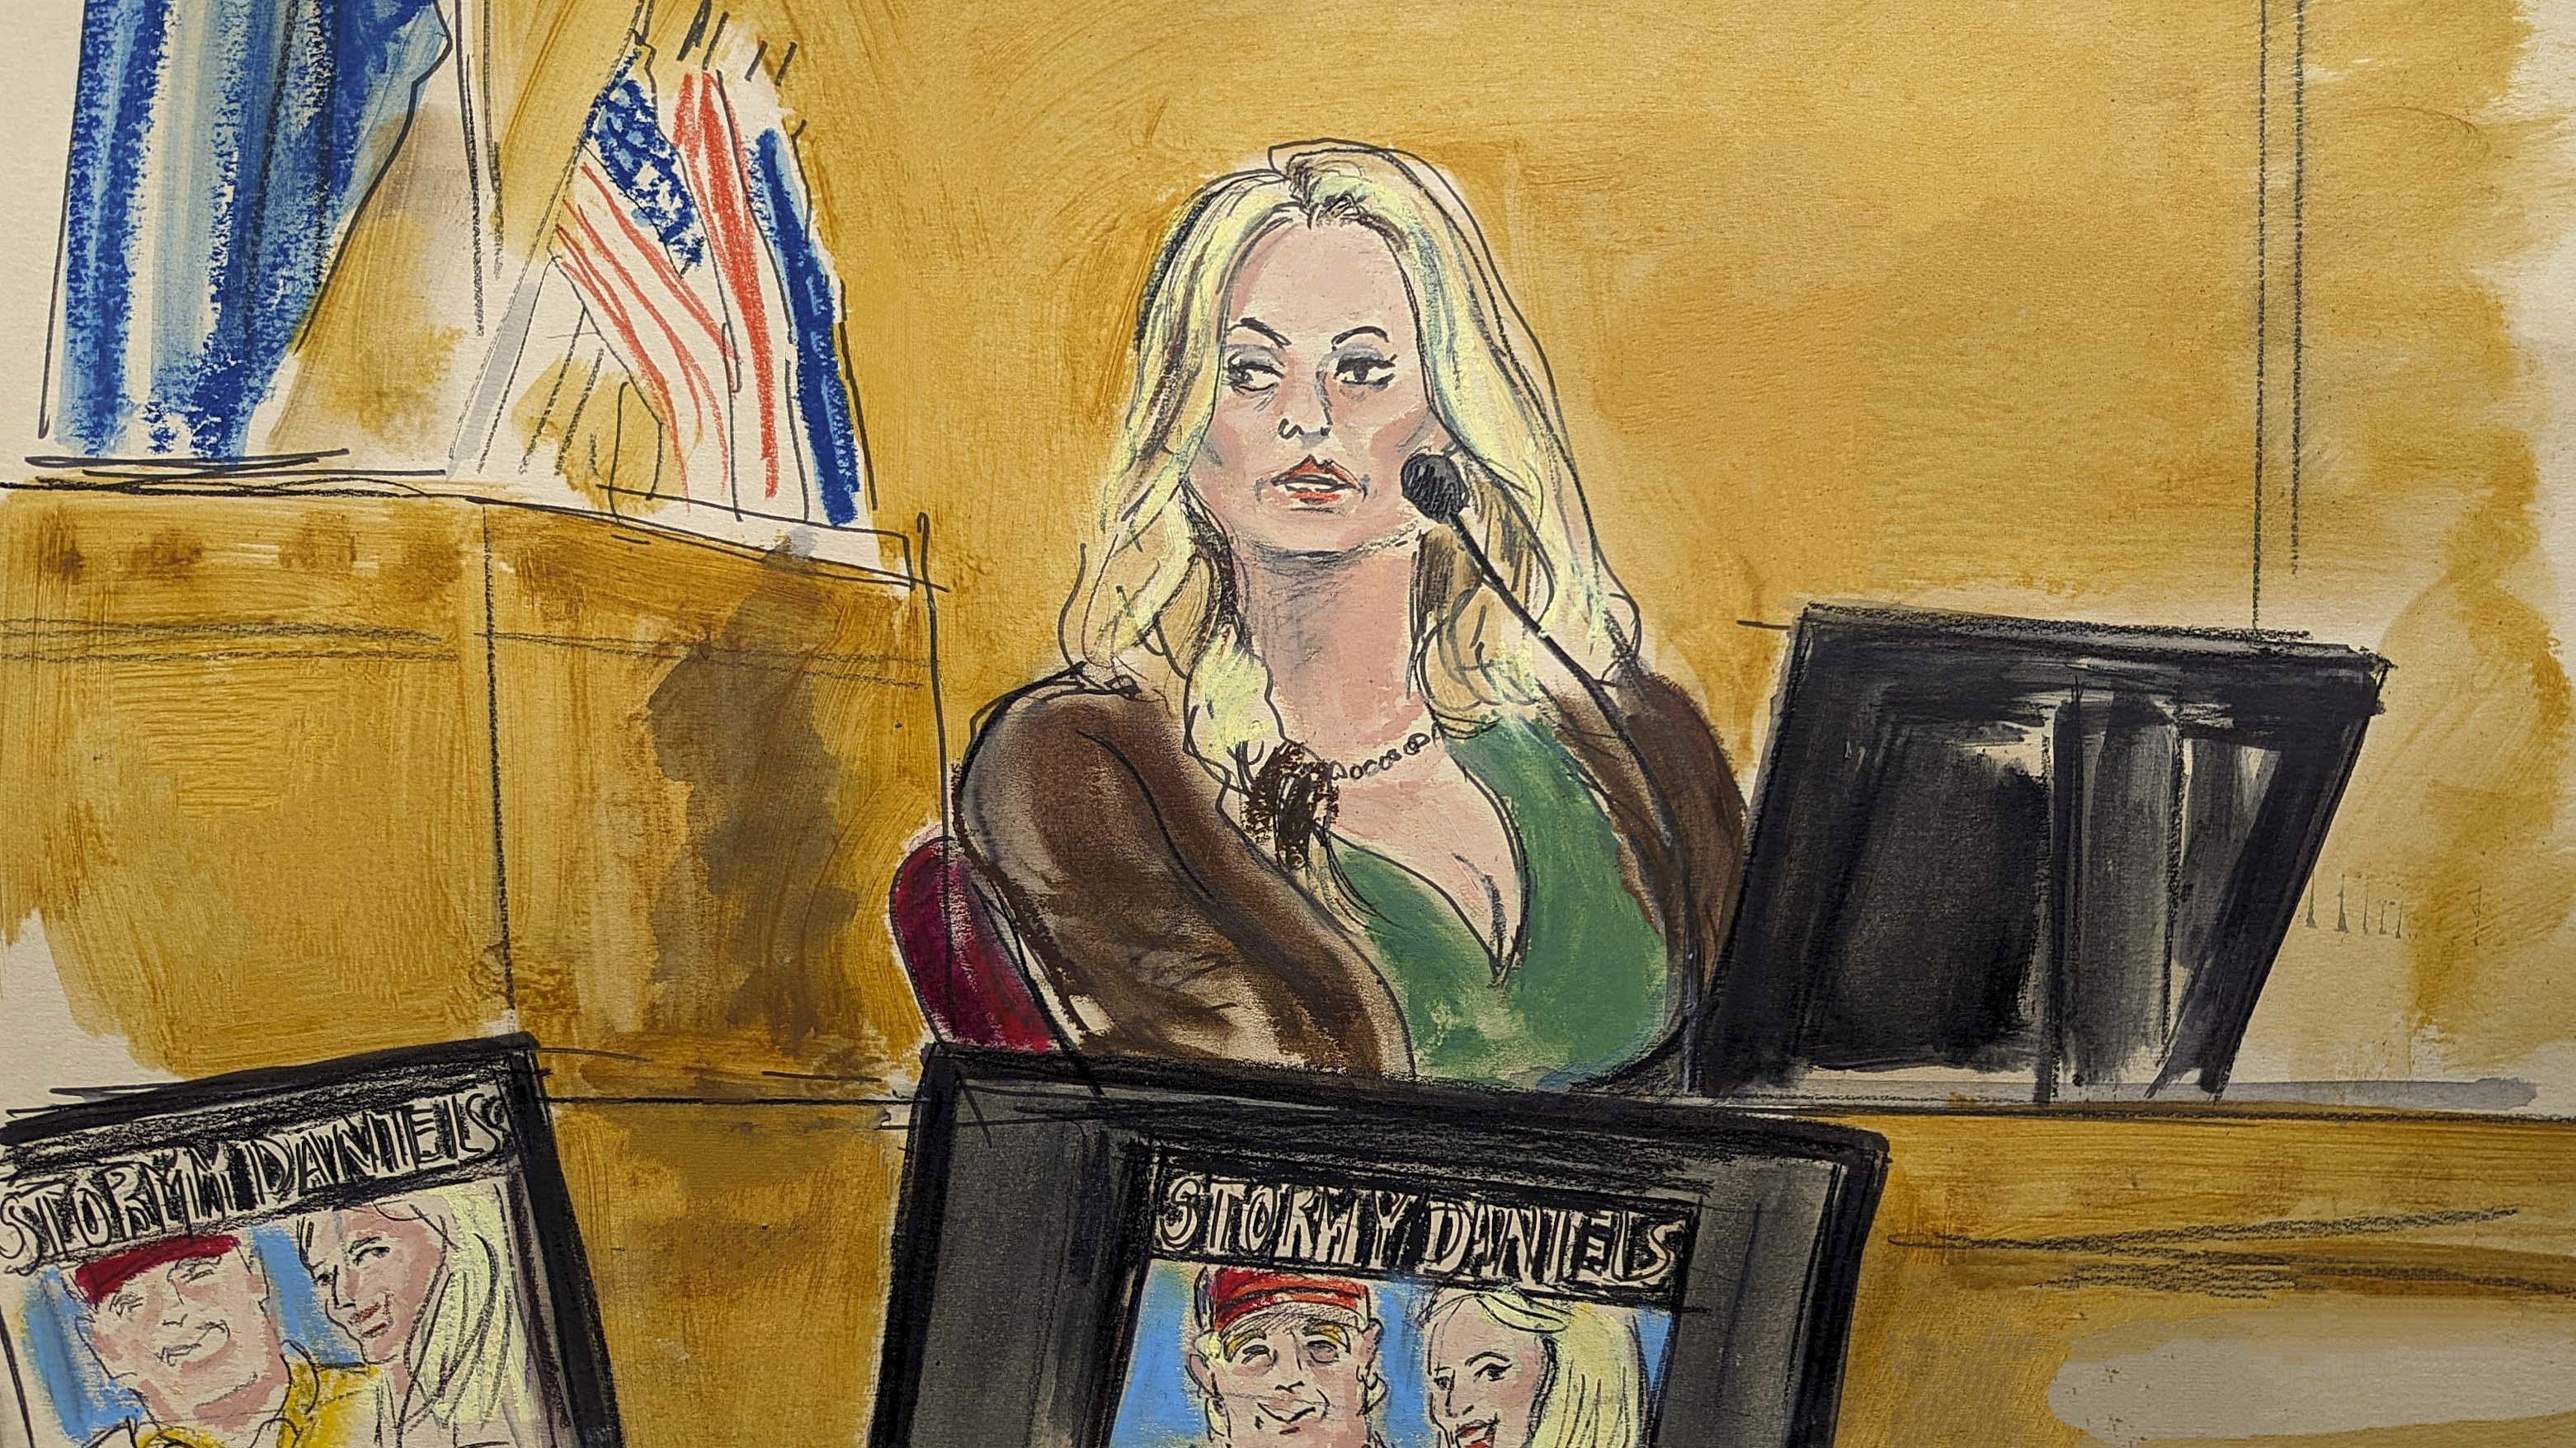 Stormy Daniels spars with Trump defence attorney